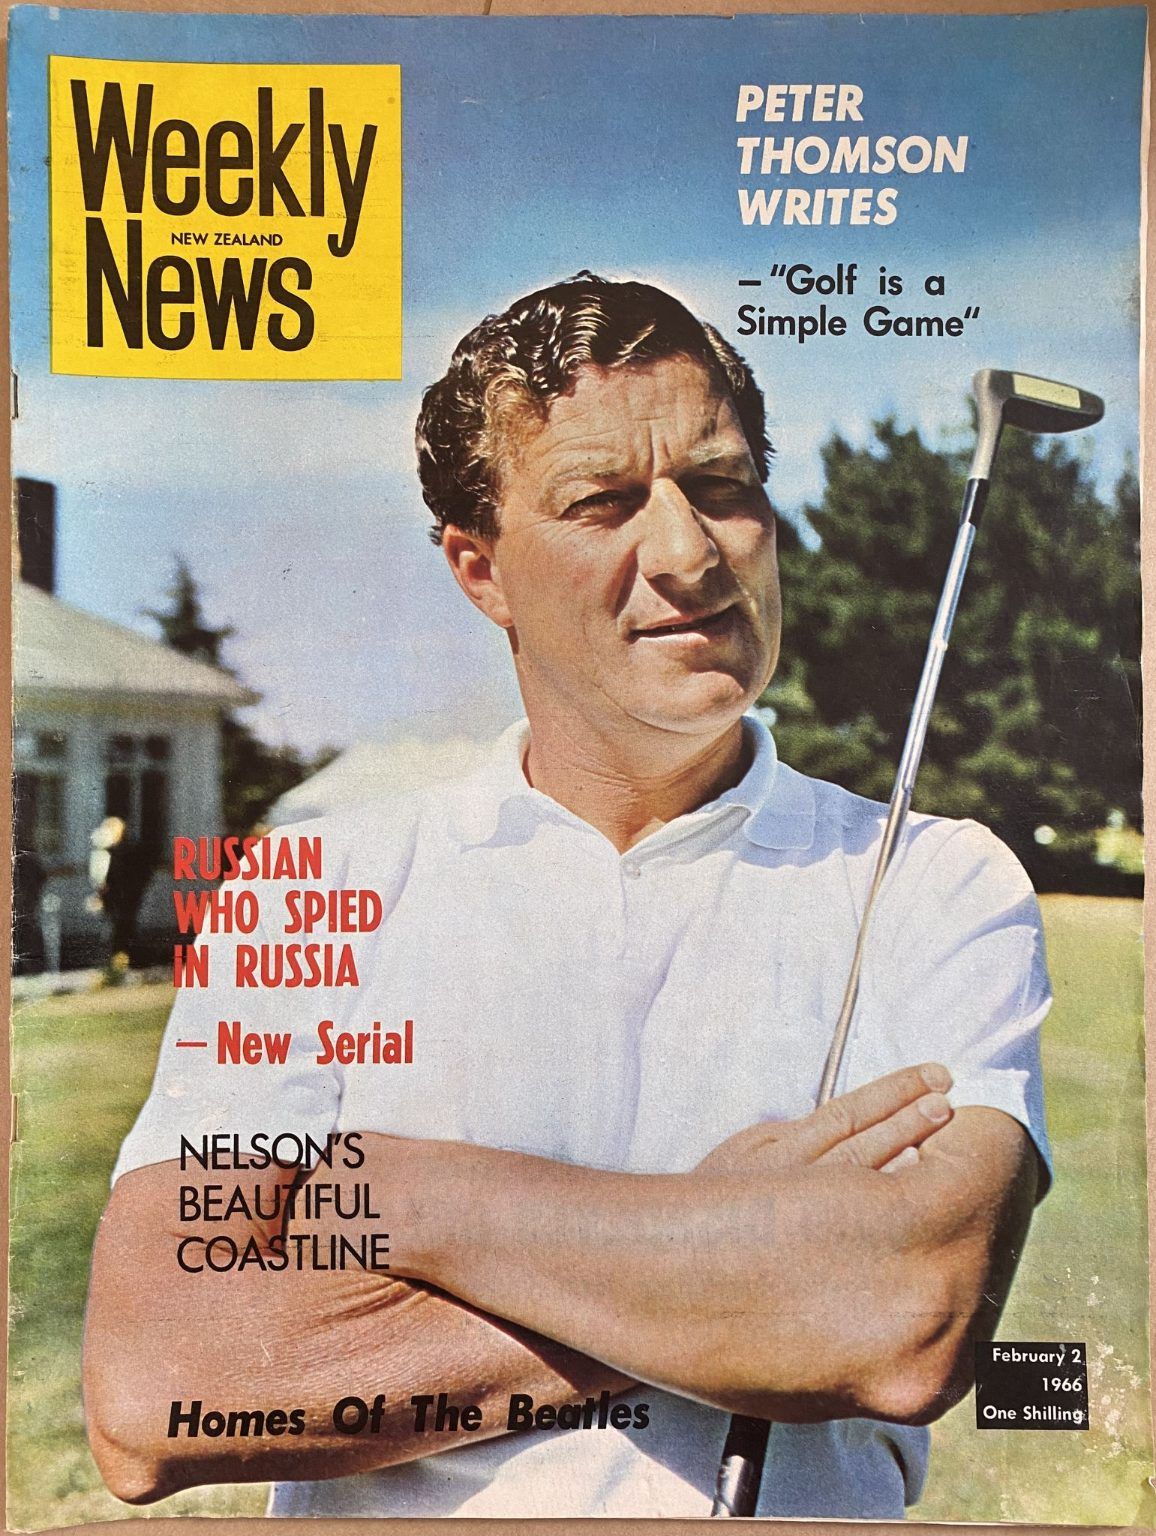 OLD NEWSPAPER: New Zealand Weekly News, No. 5332, 2 February 1966